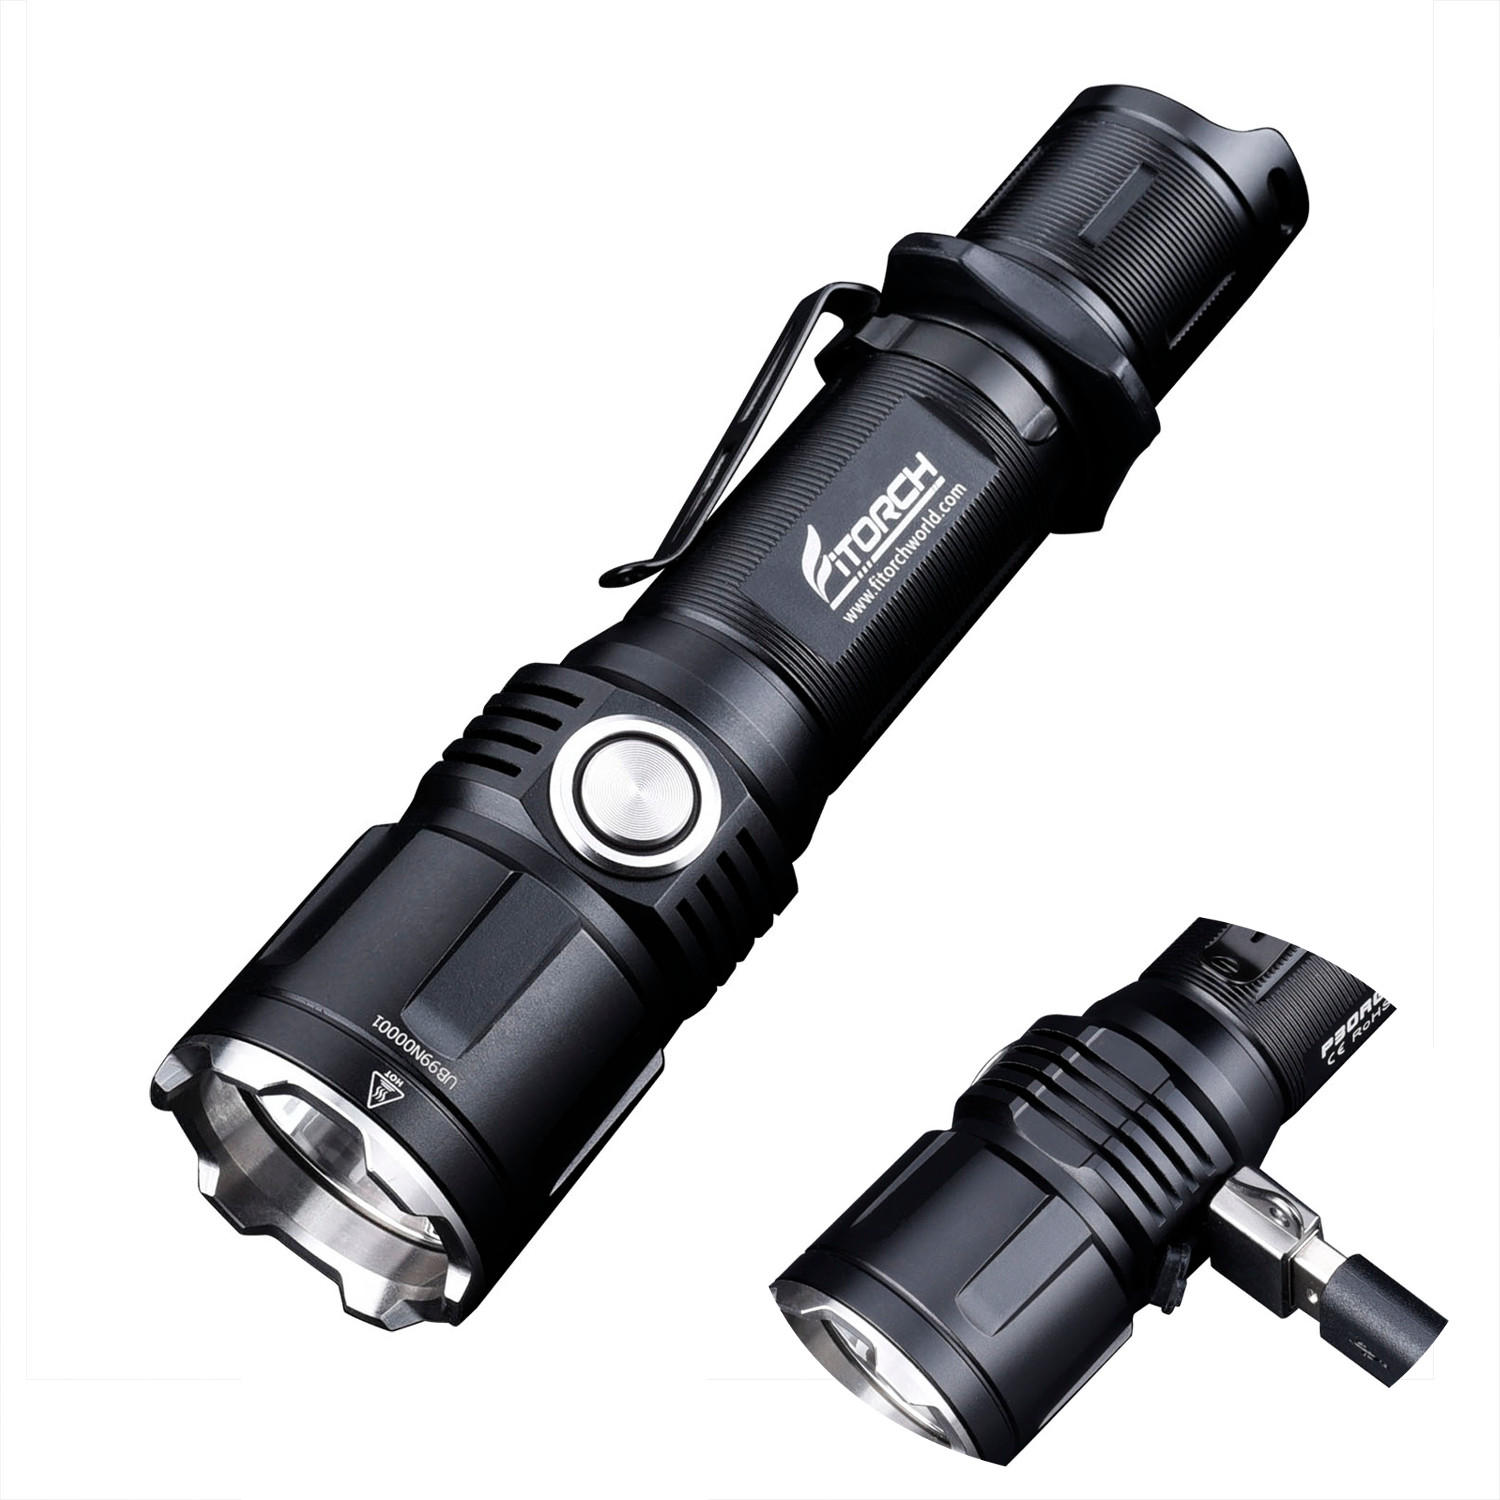 

Fitorch P30RGT XP-L2 USB Rechargeable Portable Tactical LED Flashlight 18650 Mini Torch Powerful Hig